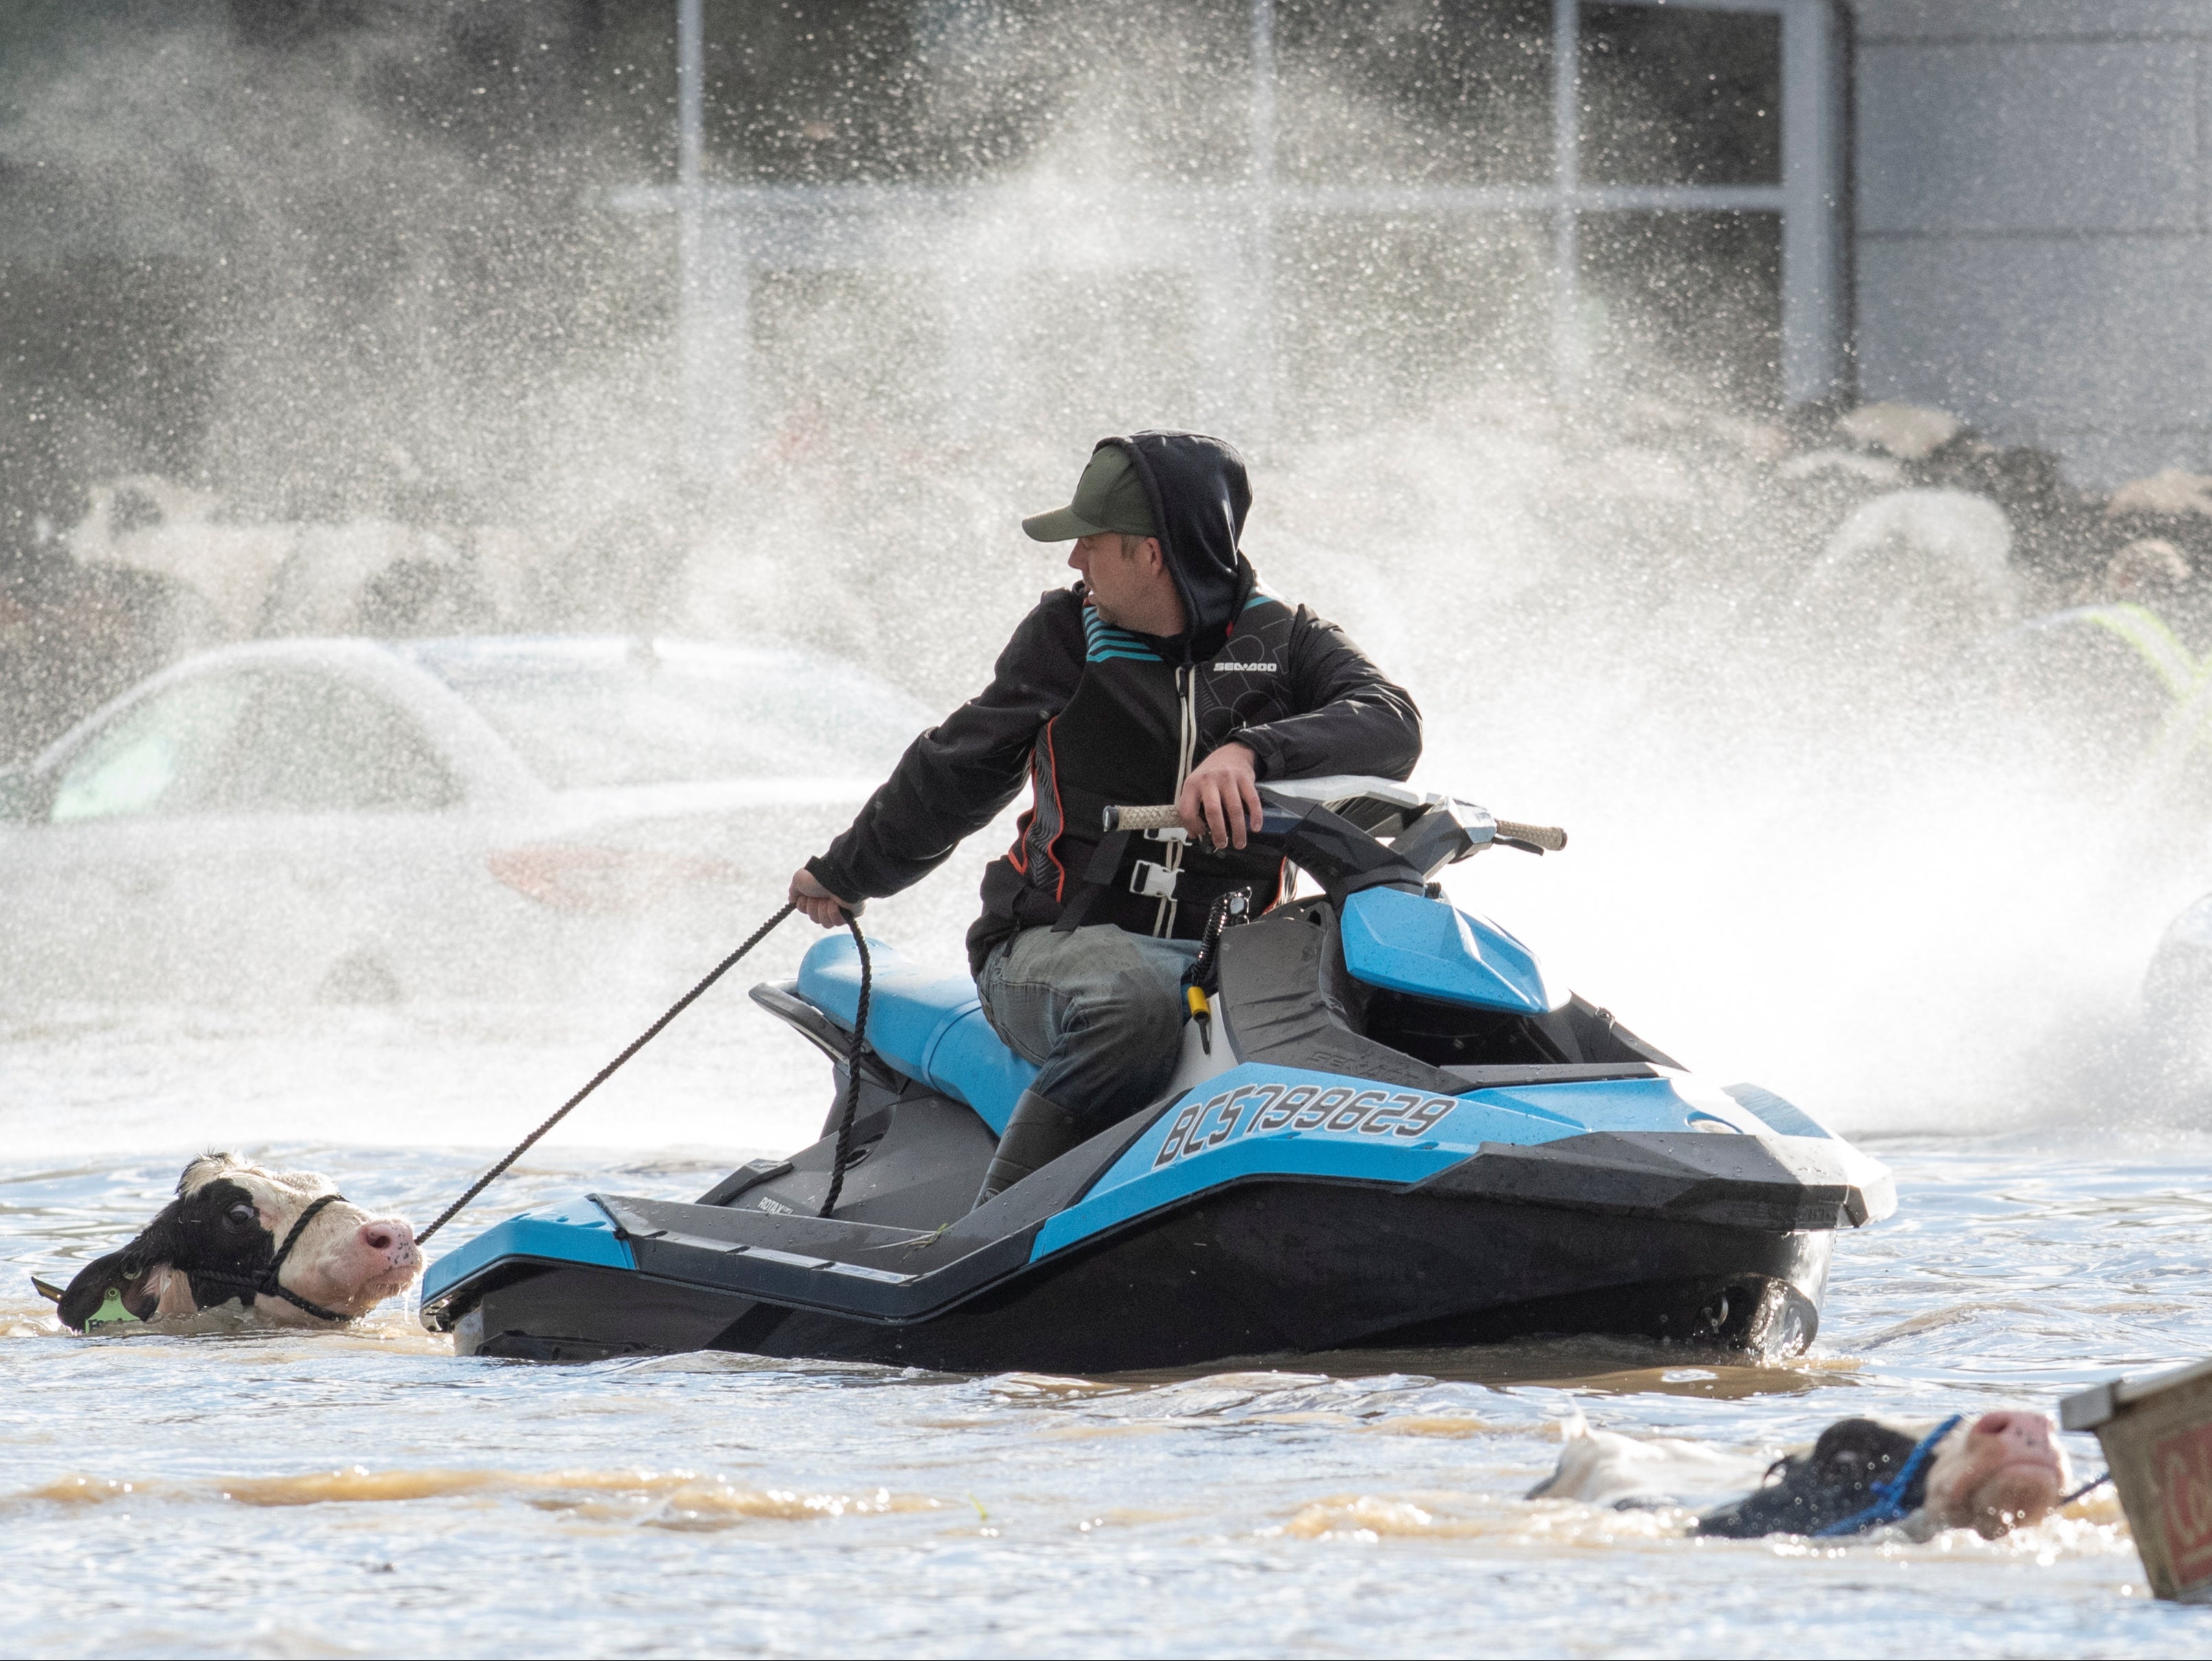 Cows that were stranded in a flooded barn are rescued by people in boats and a sea doo after rainstorms lashed the western Canadian province of British Columbia